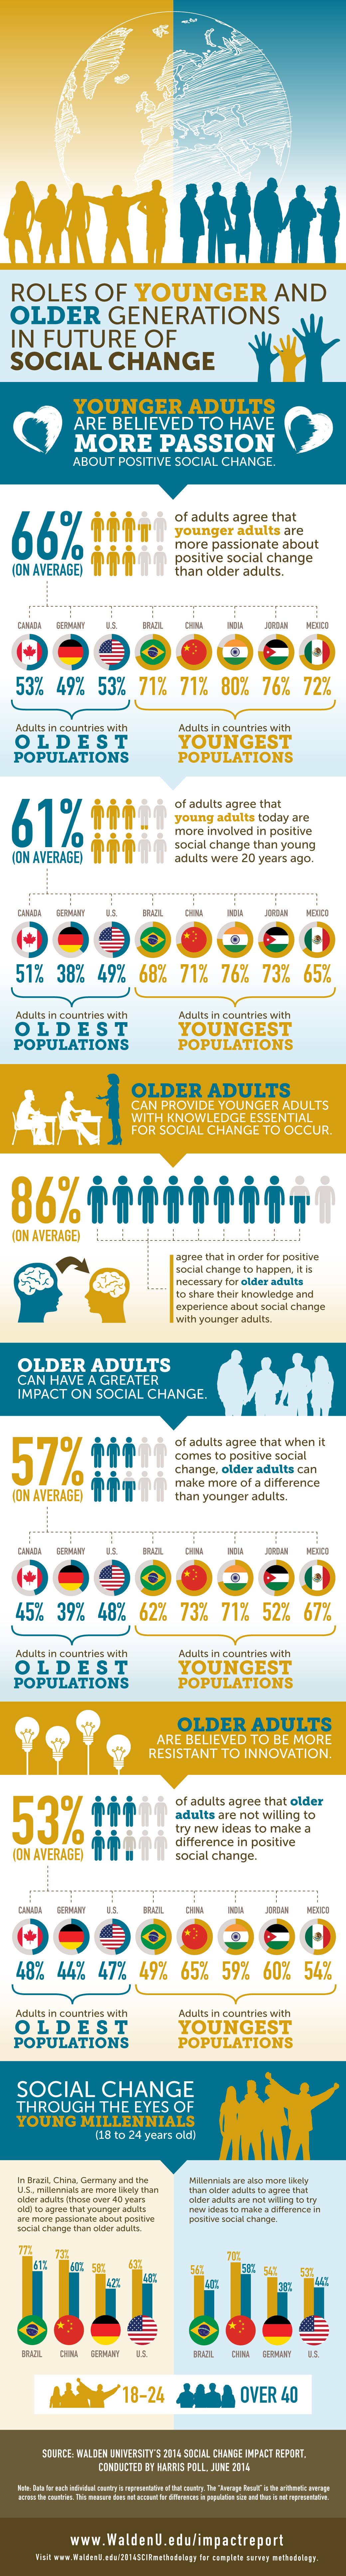 Roles of Younger and Older Generations in the Future of Social Change